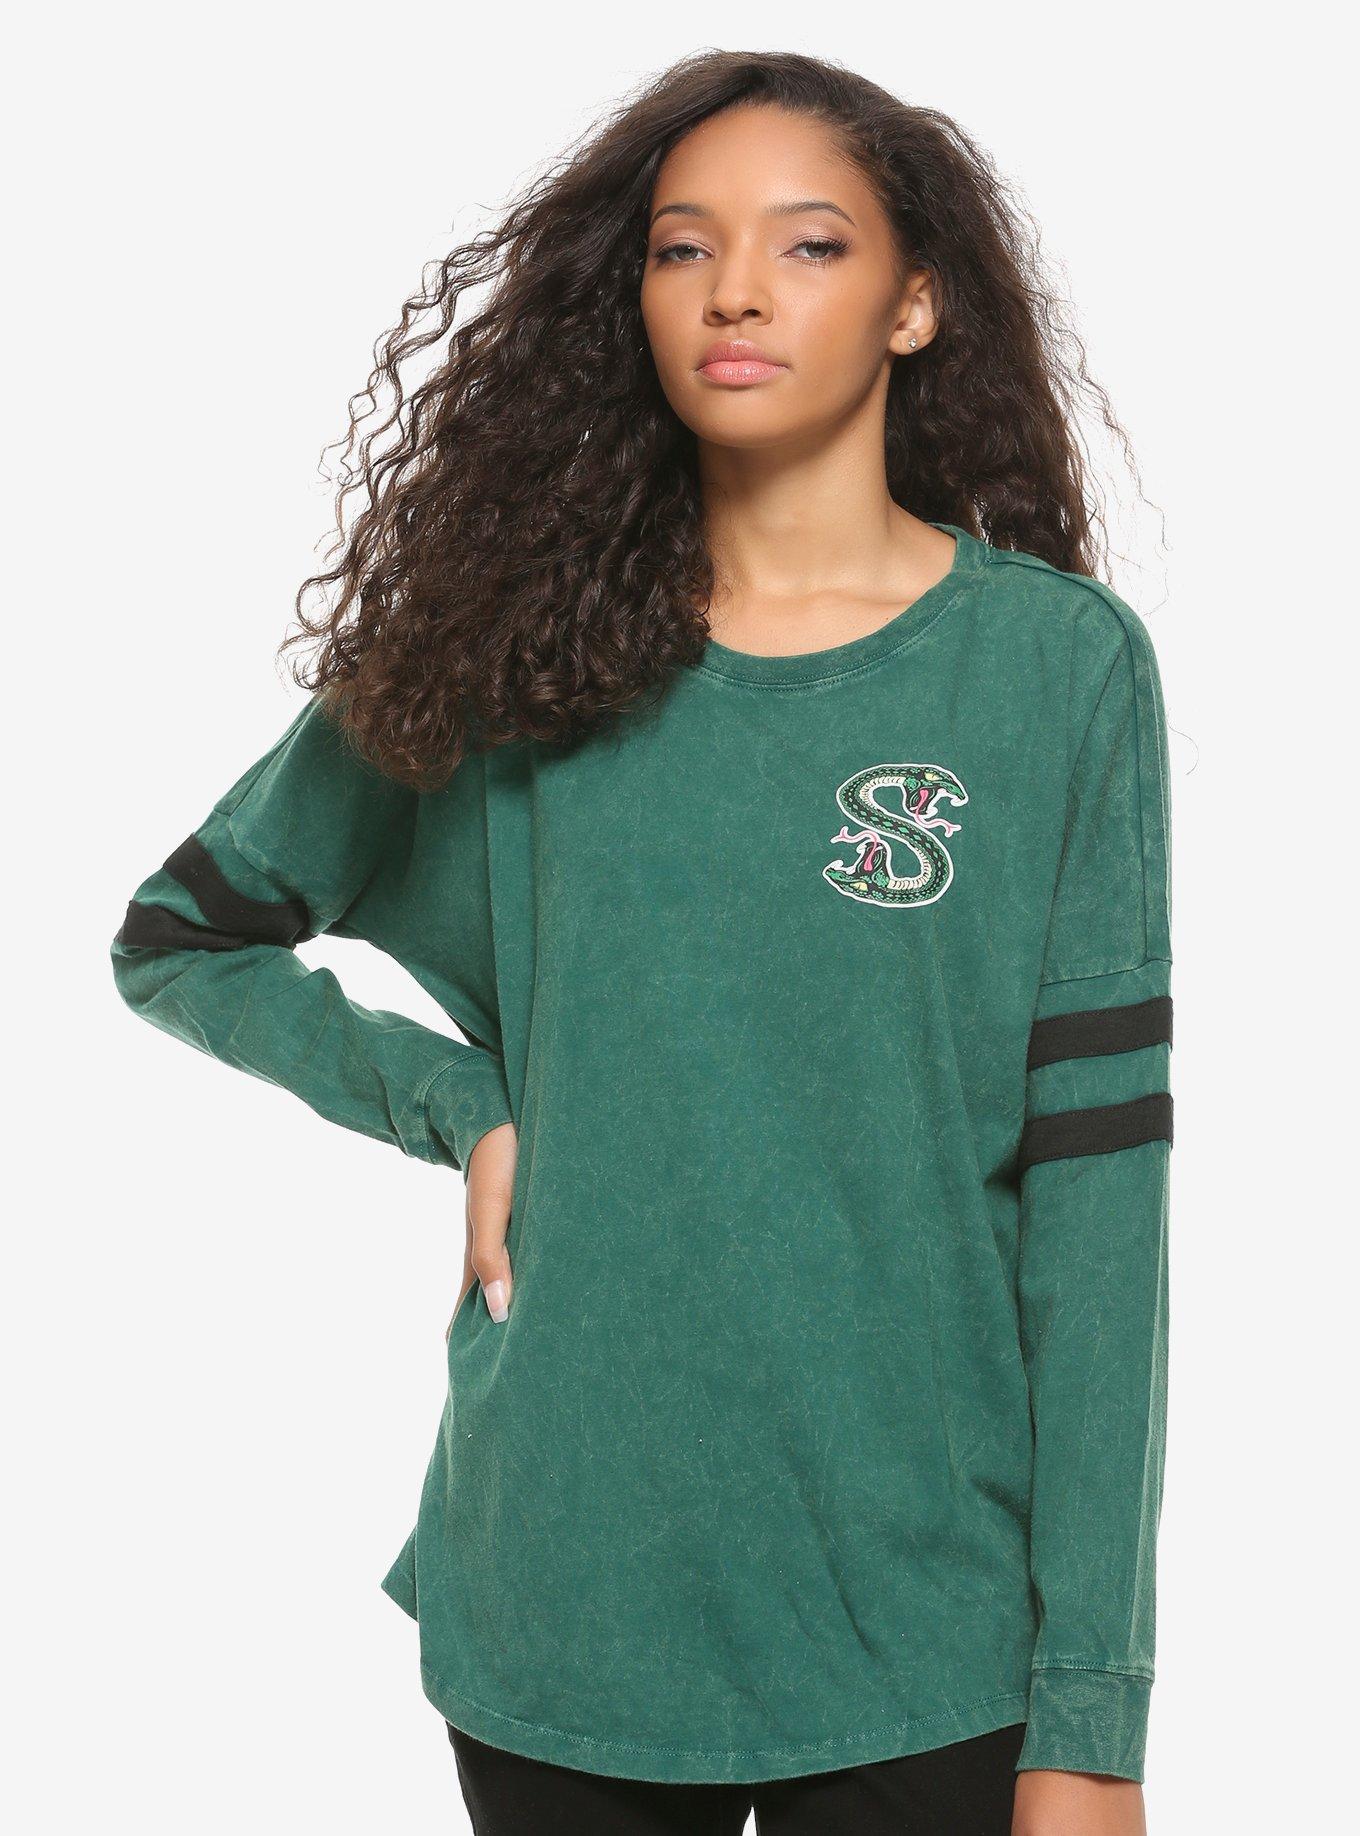 Riverdale Southside Serpents Oil Wash Girls Athletic Jersey | Hot Topic